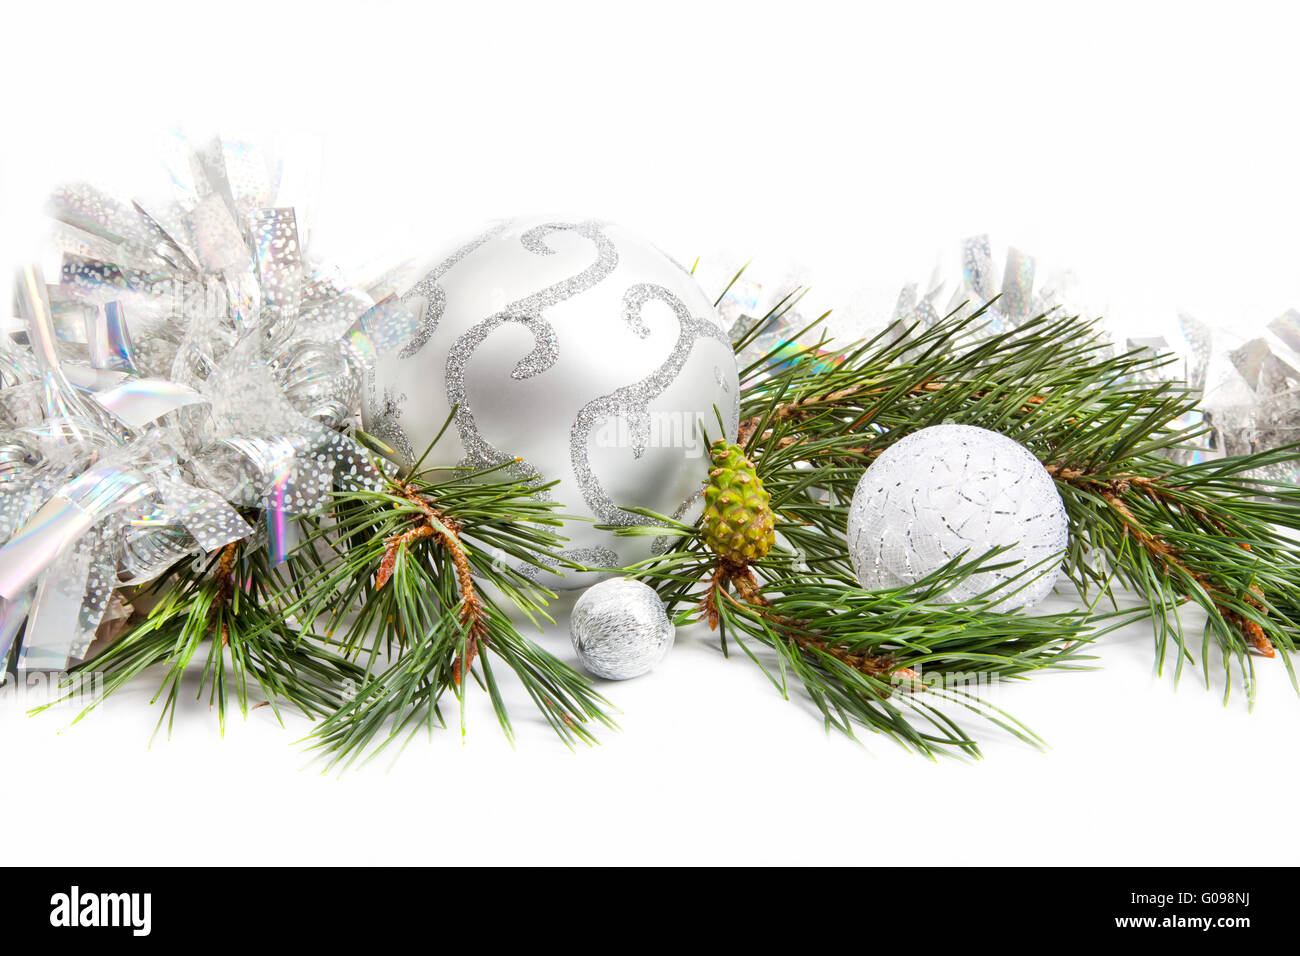 Fir tree evergreen branch with new year decorations Stock Photo